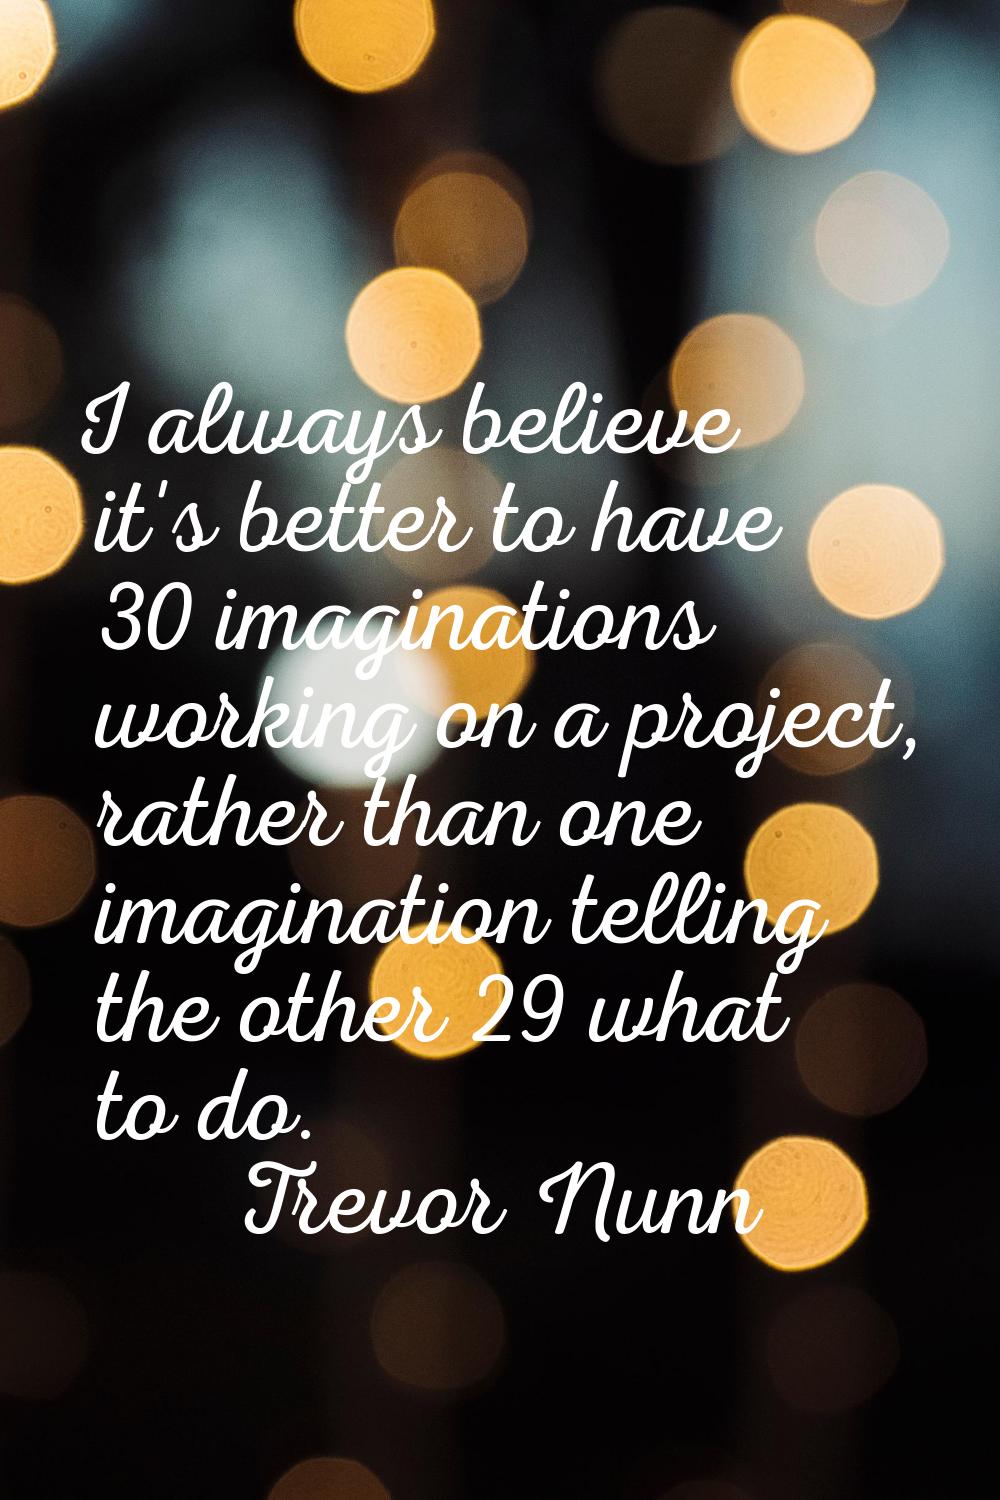 I always believe it's better to have 30 imaginations working on a project, rather than one imaginat